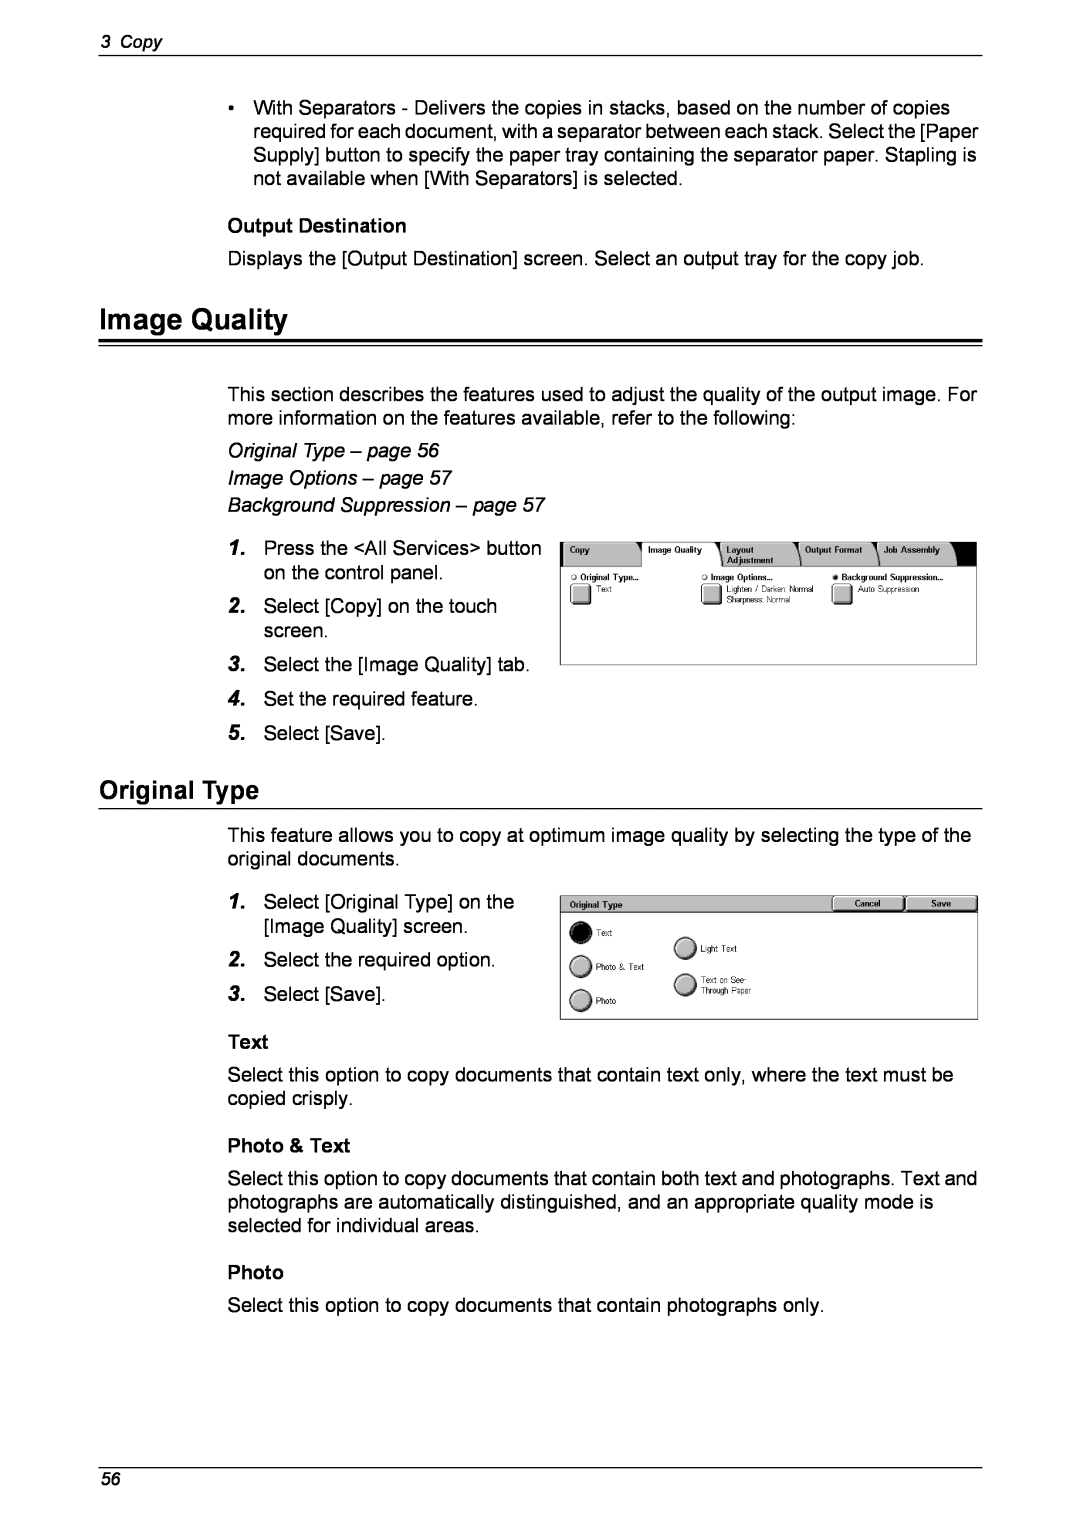 Xerox 5230 Image Quality, Output Destination, Original Type – page Image Options – page, Background Suppression – page 